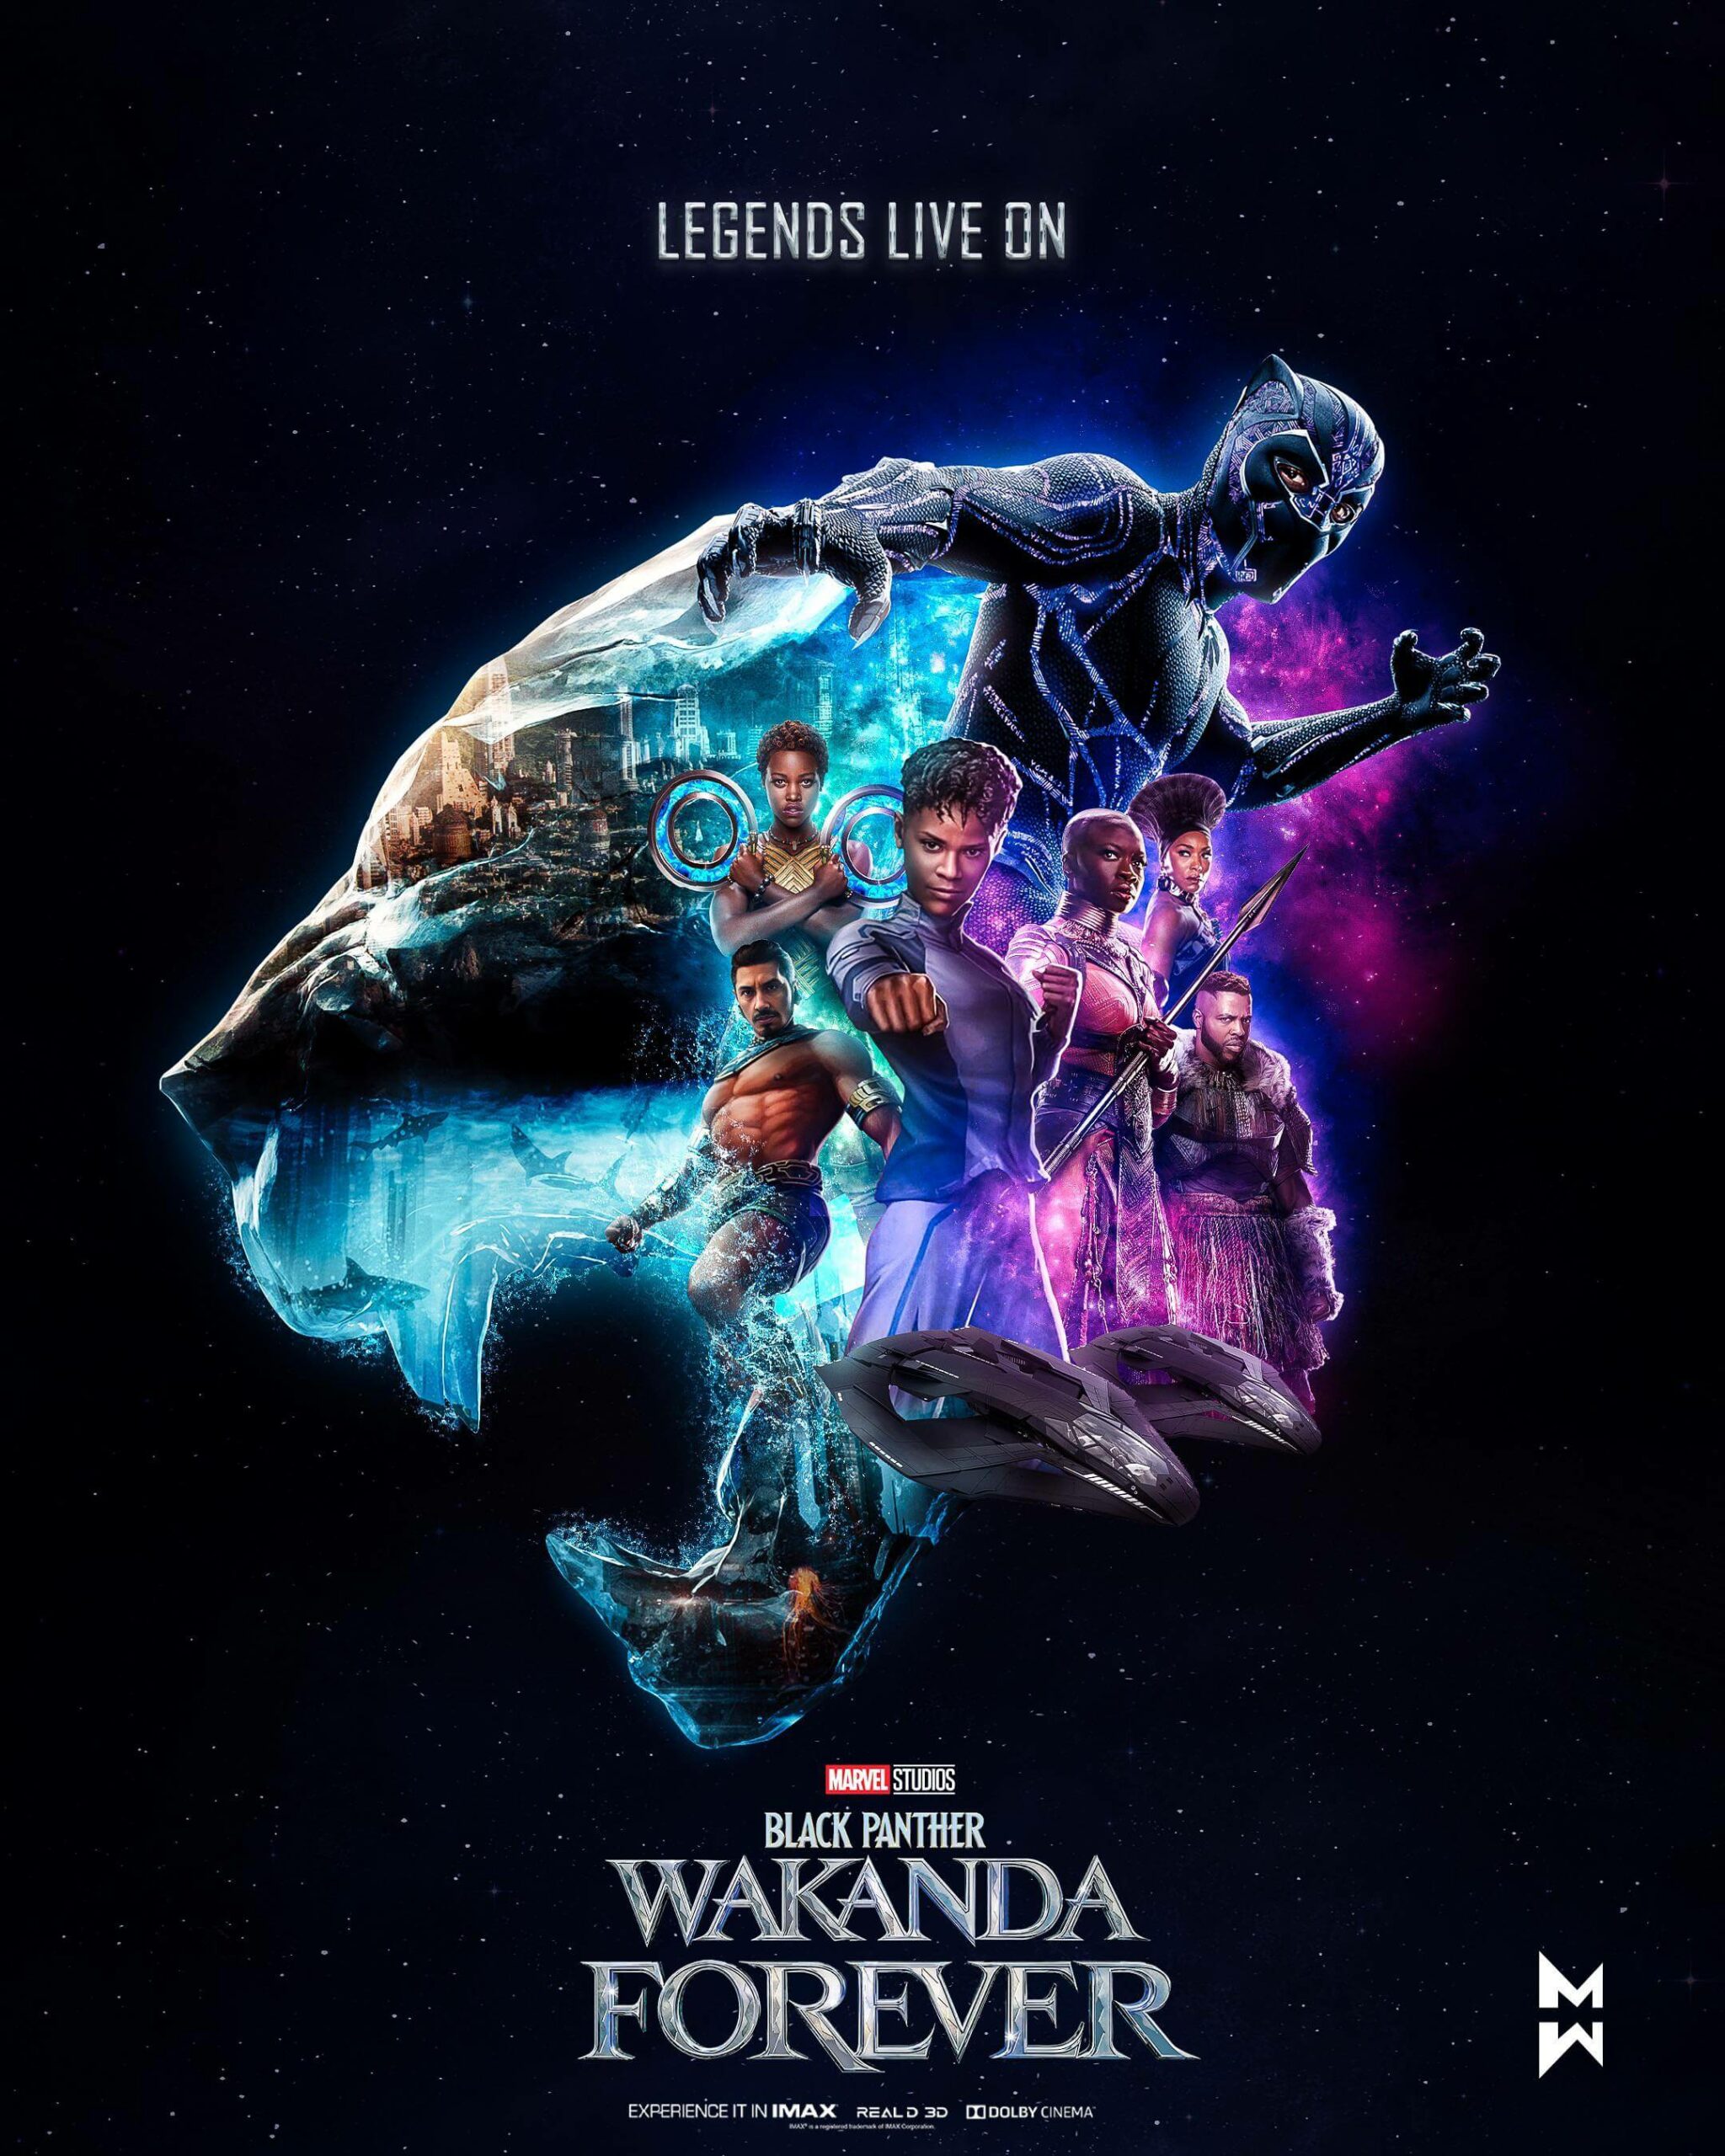 The BLACK PANTHER: WAKANDA FOREVER